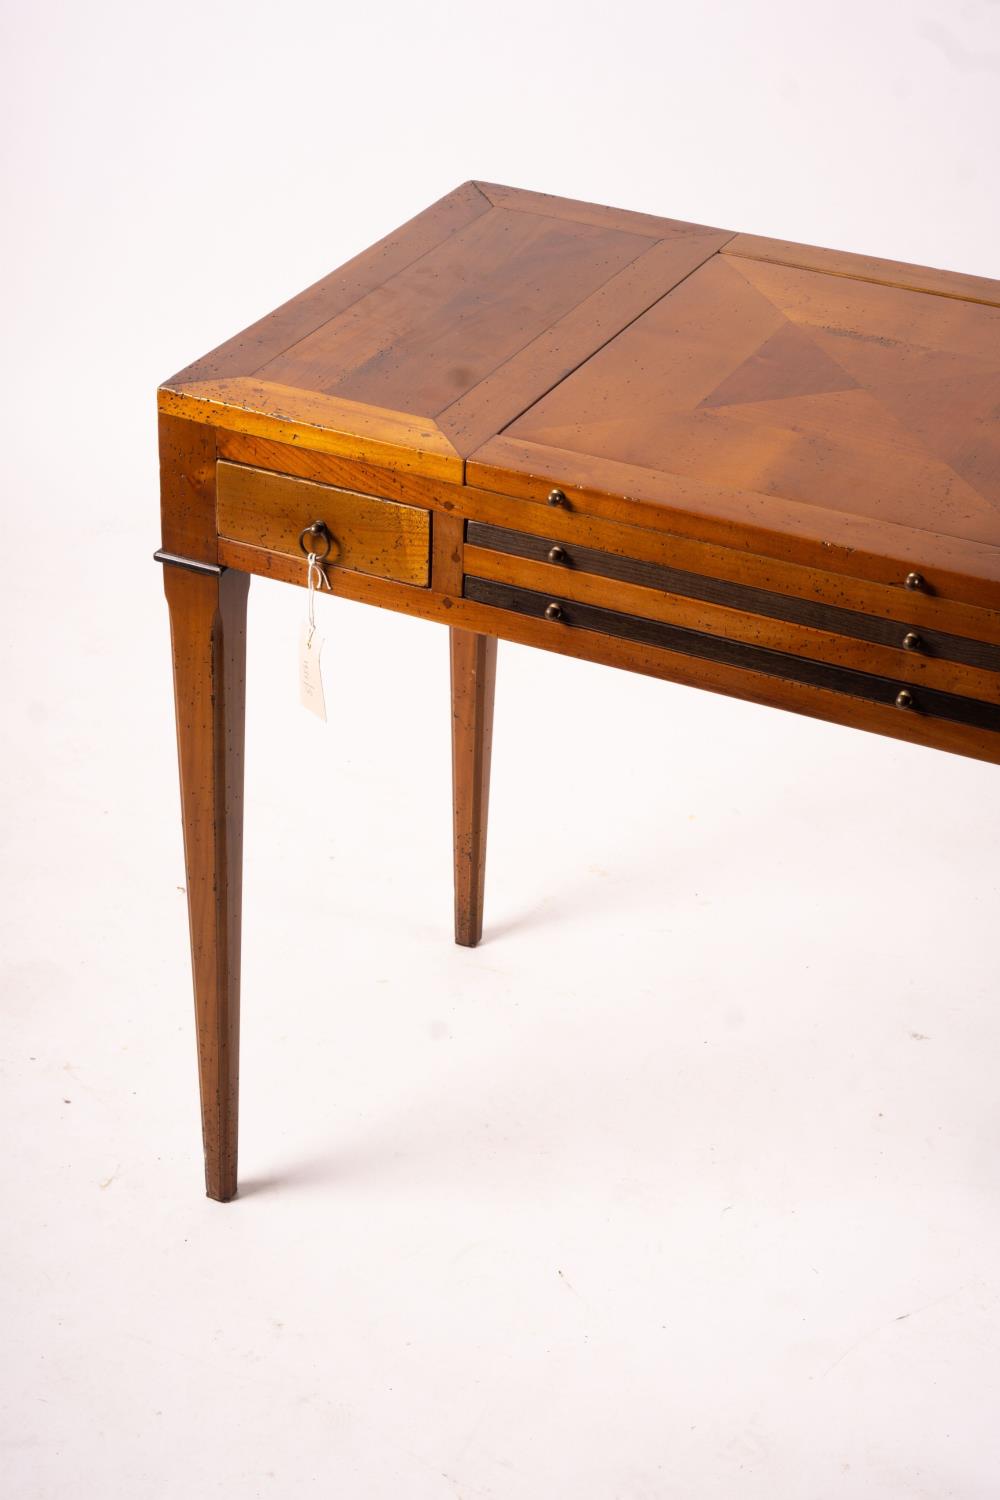 A George III style cherry wood games table with backgammon and chess interior, width 90cm, depth - Image 5 of 10